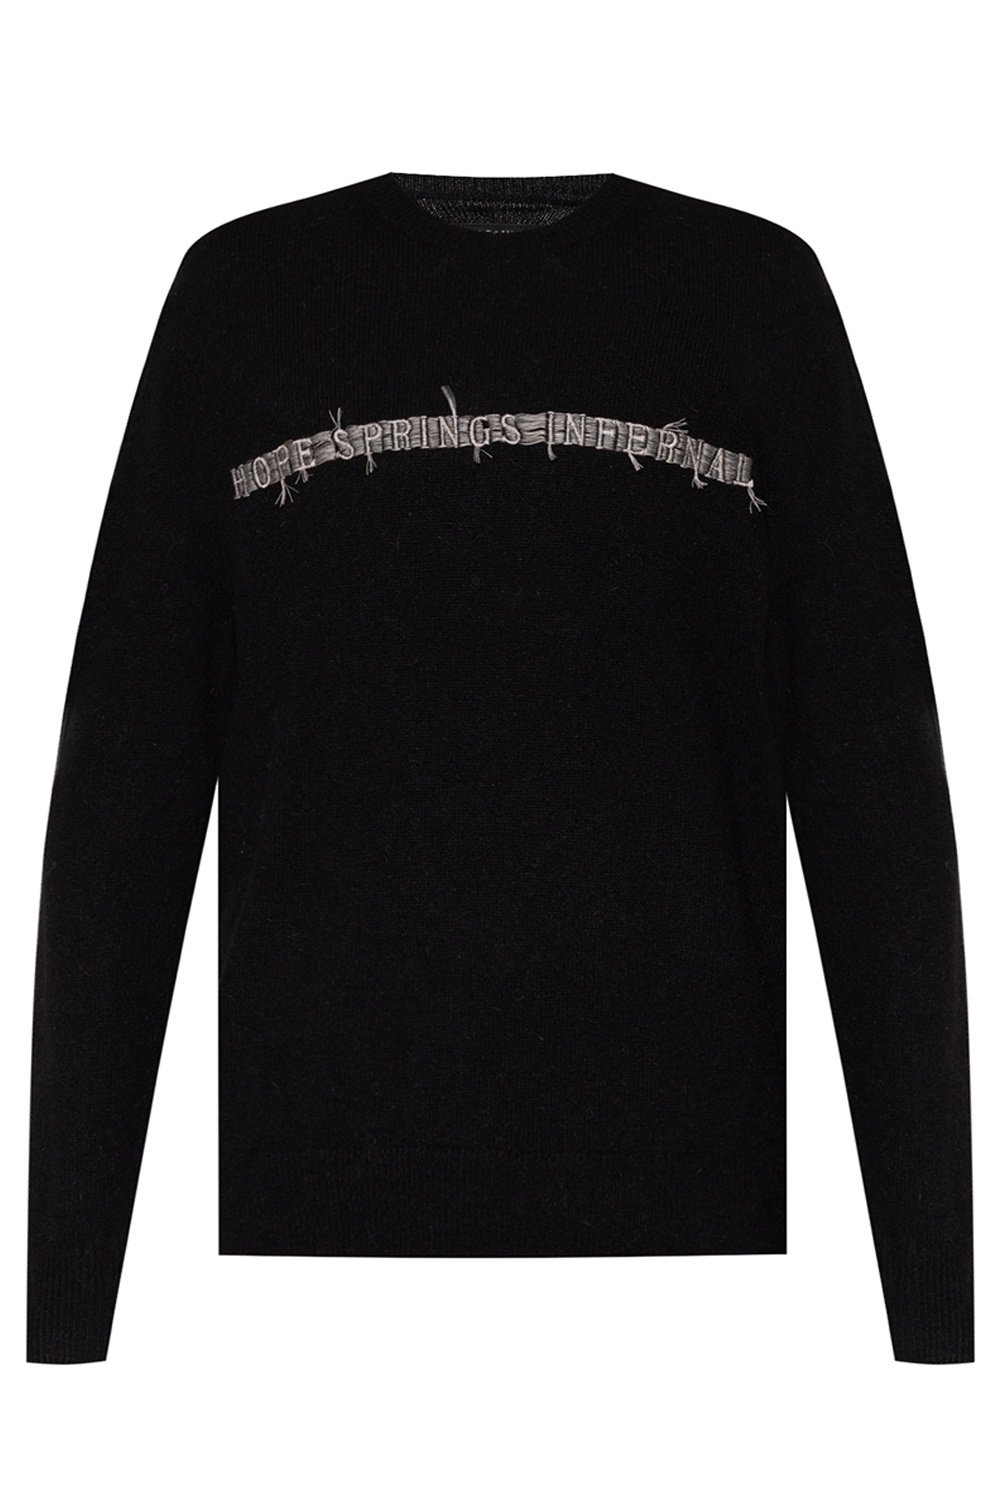 AllSaints ‘Hope’ sweater with logo